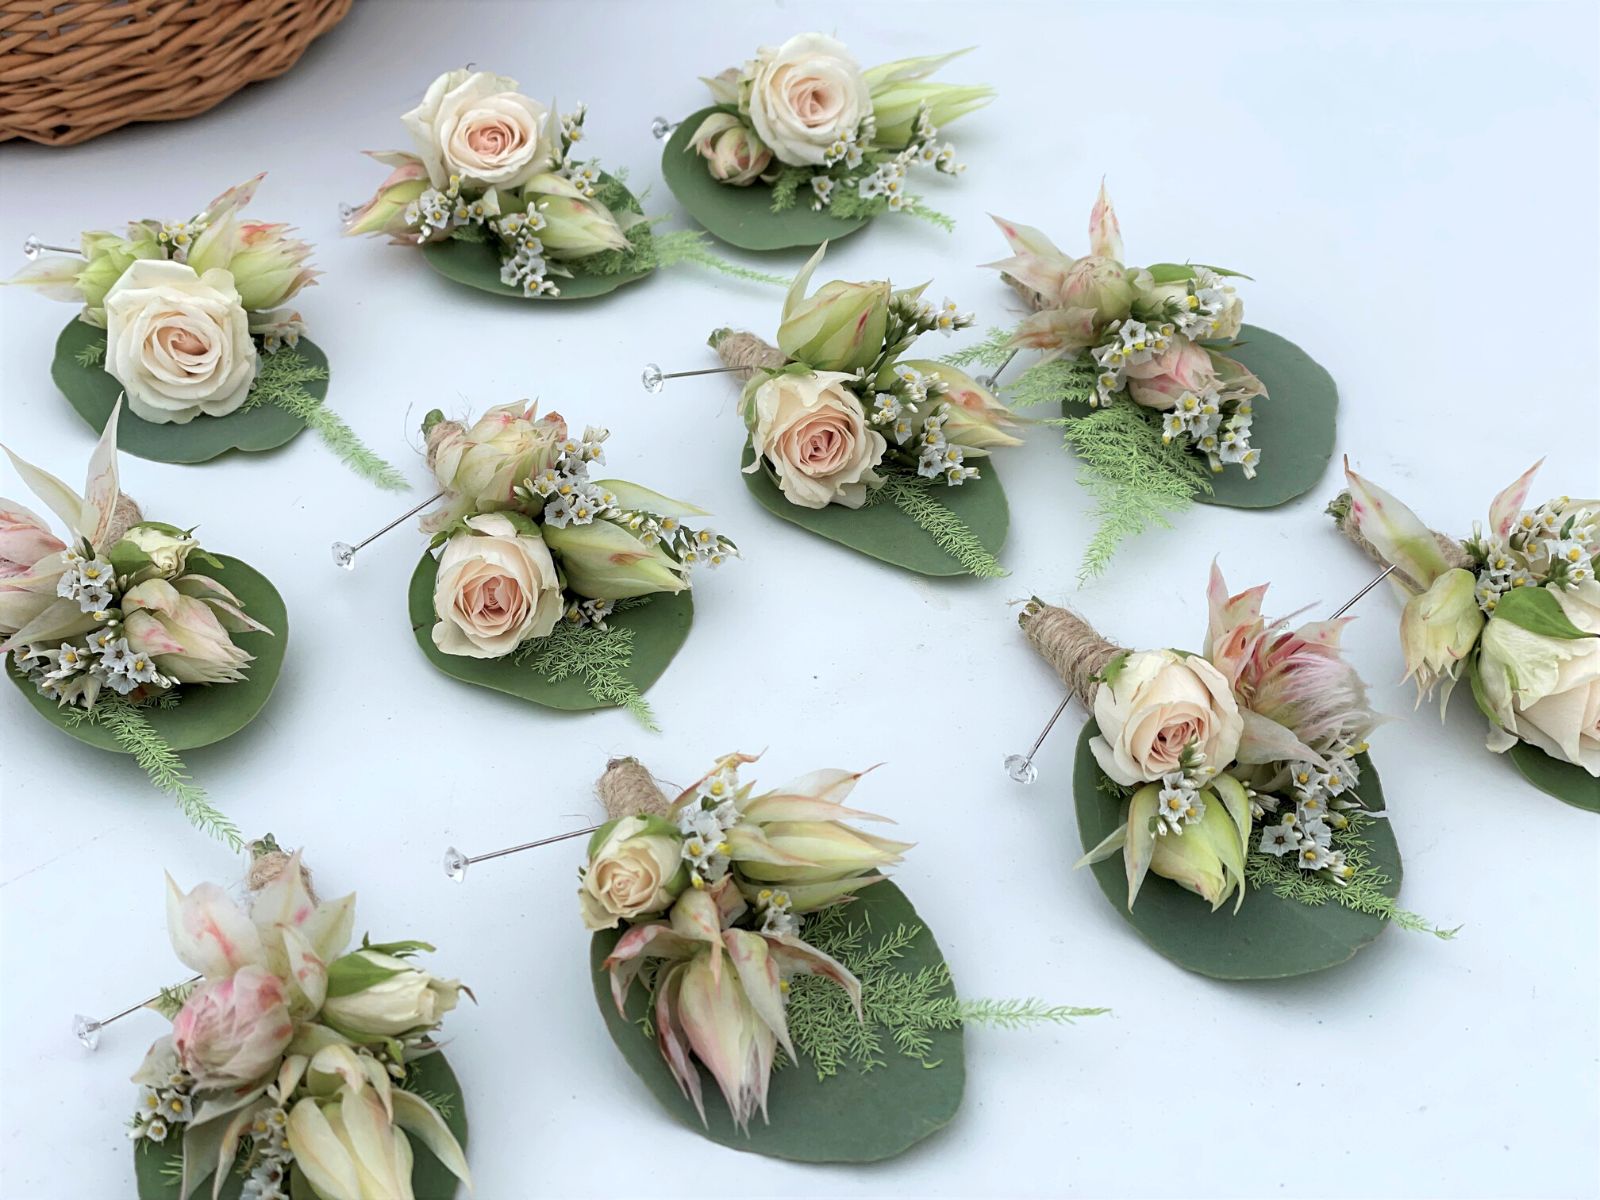 Protea Blushing Bride, Spray Roses, and White Peonies for the Corsages Blog by Kristina Rimiene on Thursd